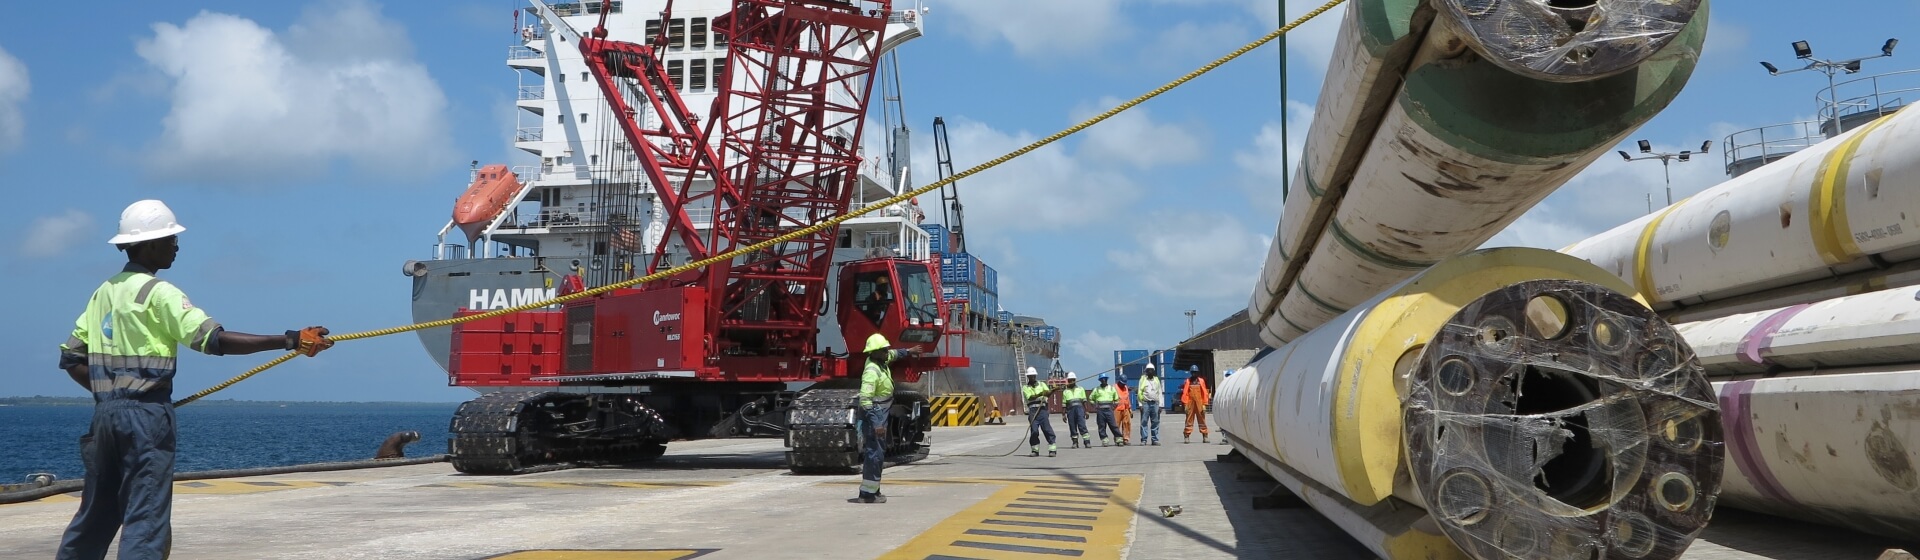 Alistair Group's self-rigging Manitowoc MLC165 crawler crane is first of its kind in Africa